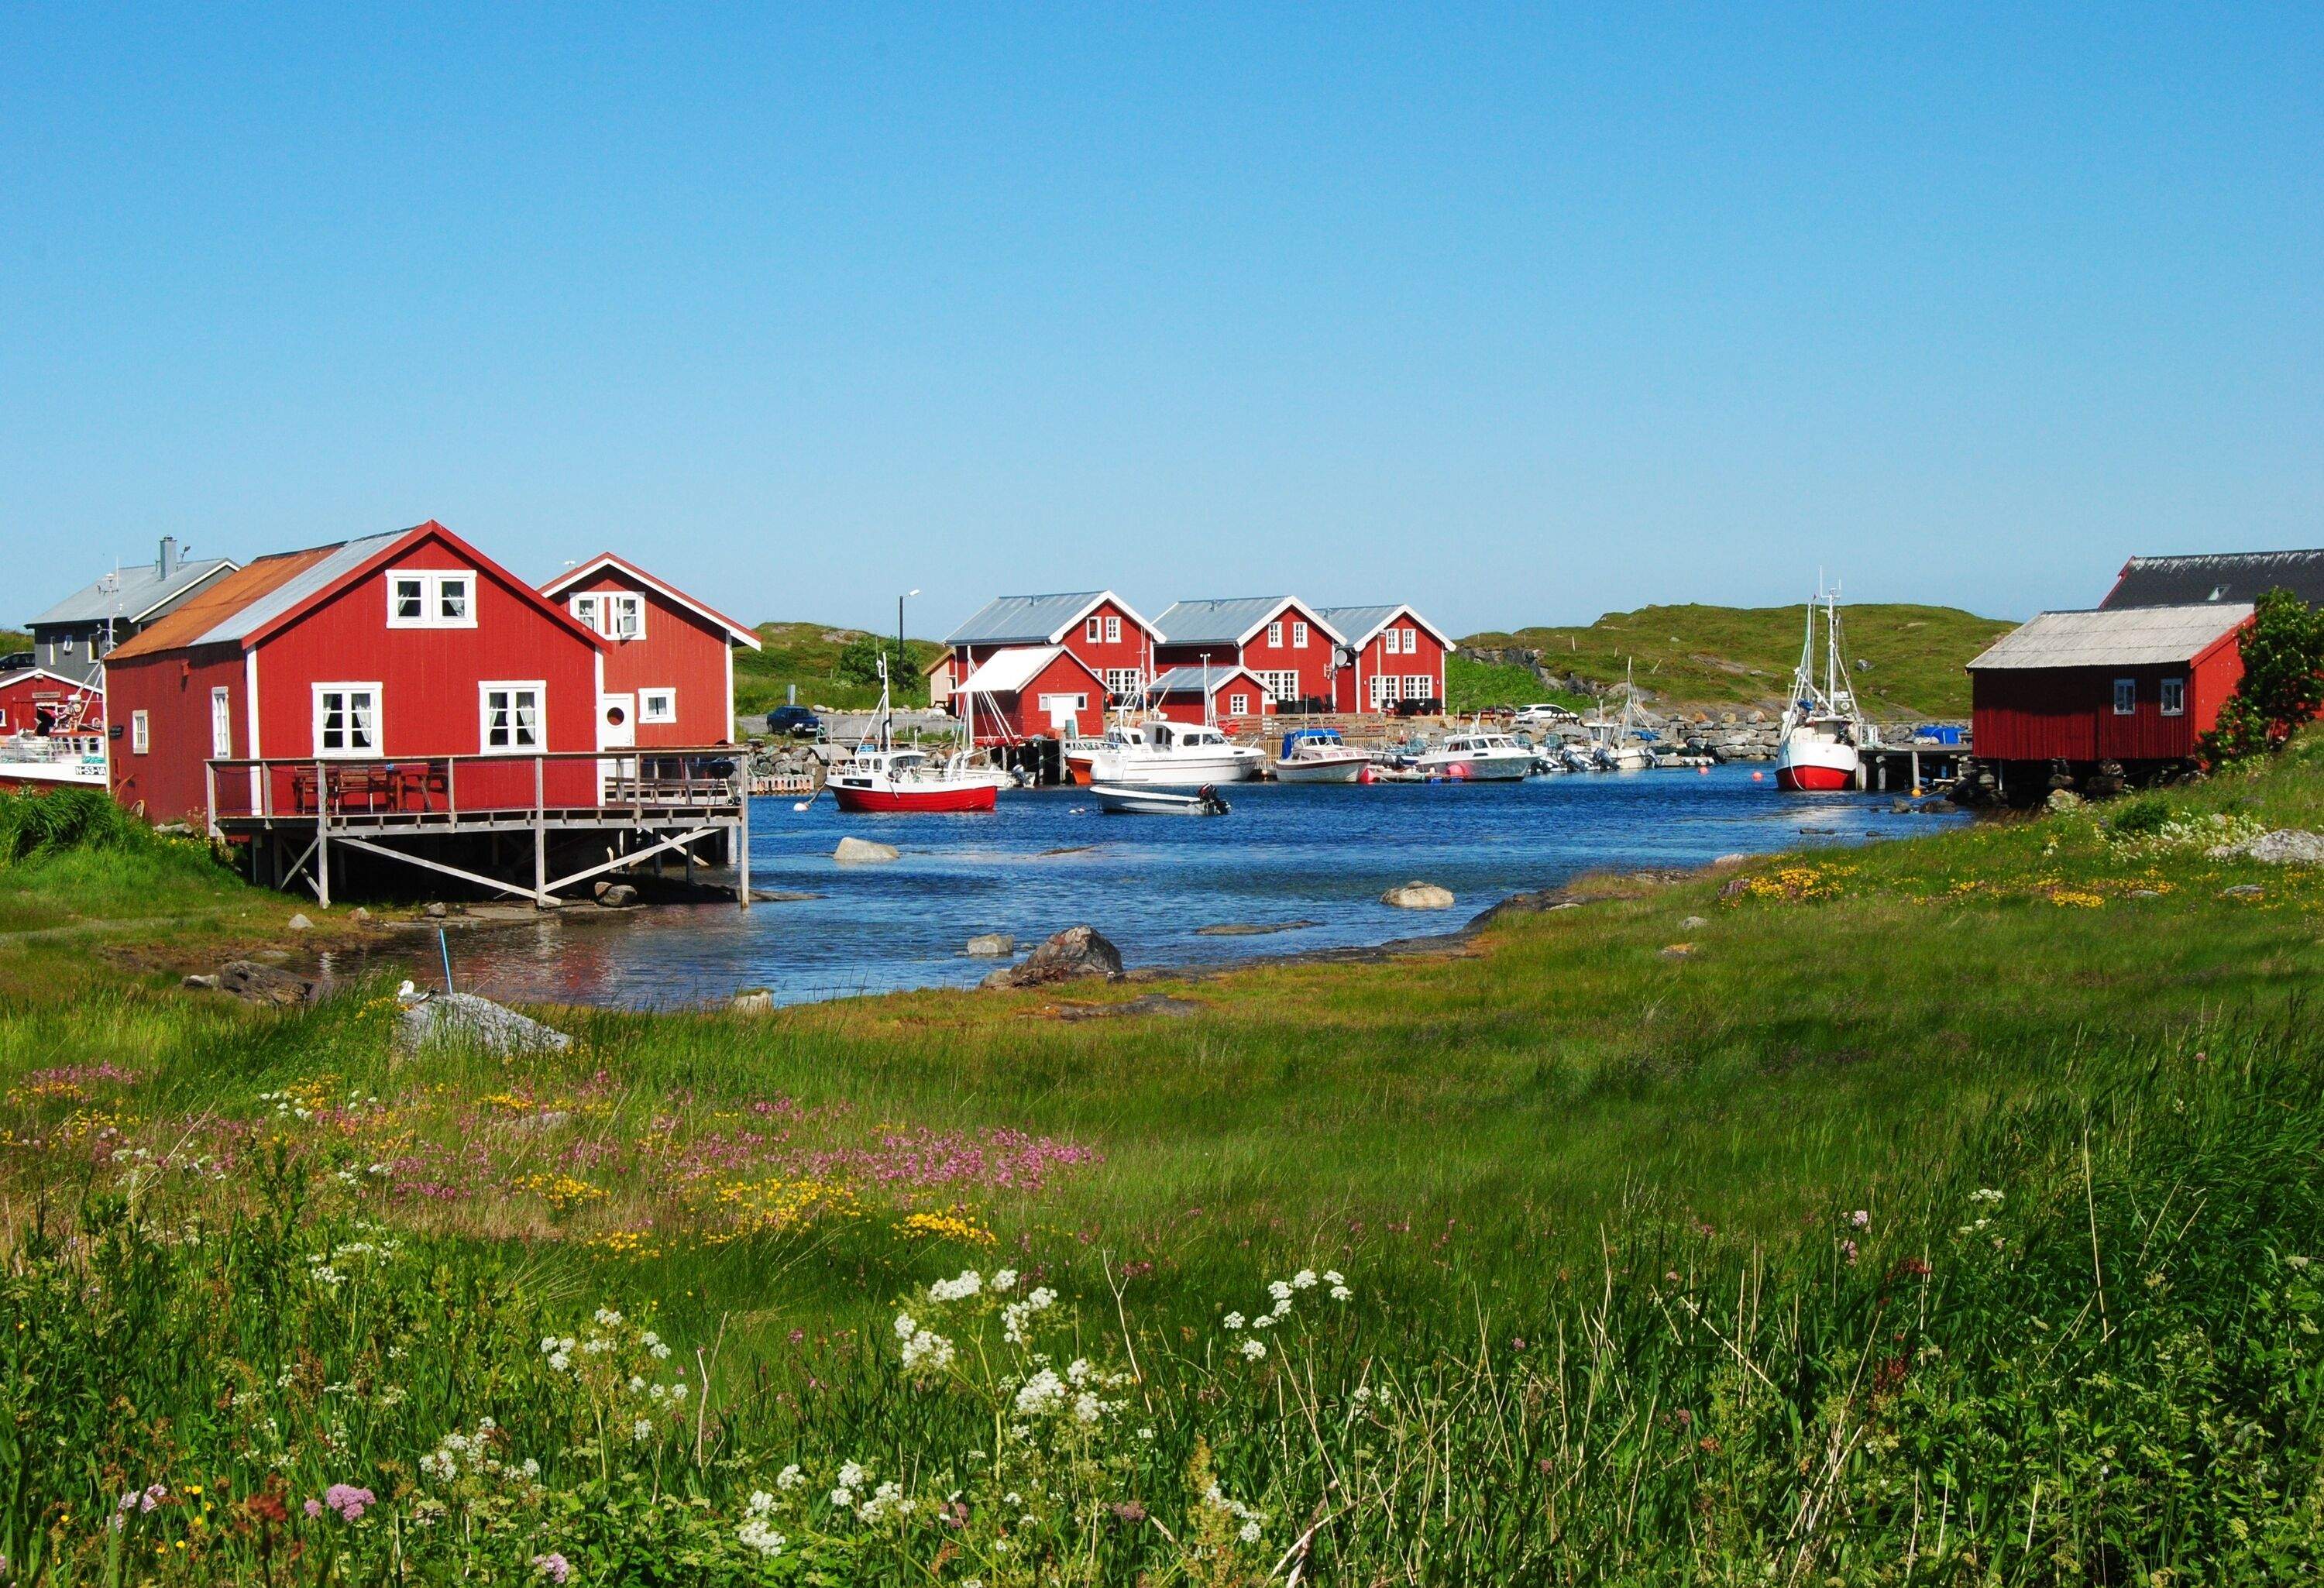 A harbour with anchored sailboats surrounded by red houses on stilts as seen from a grass field with colourful flowers.